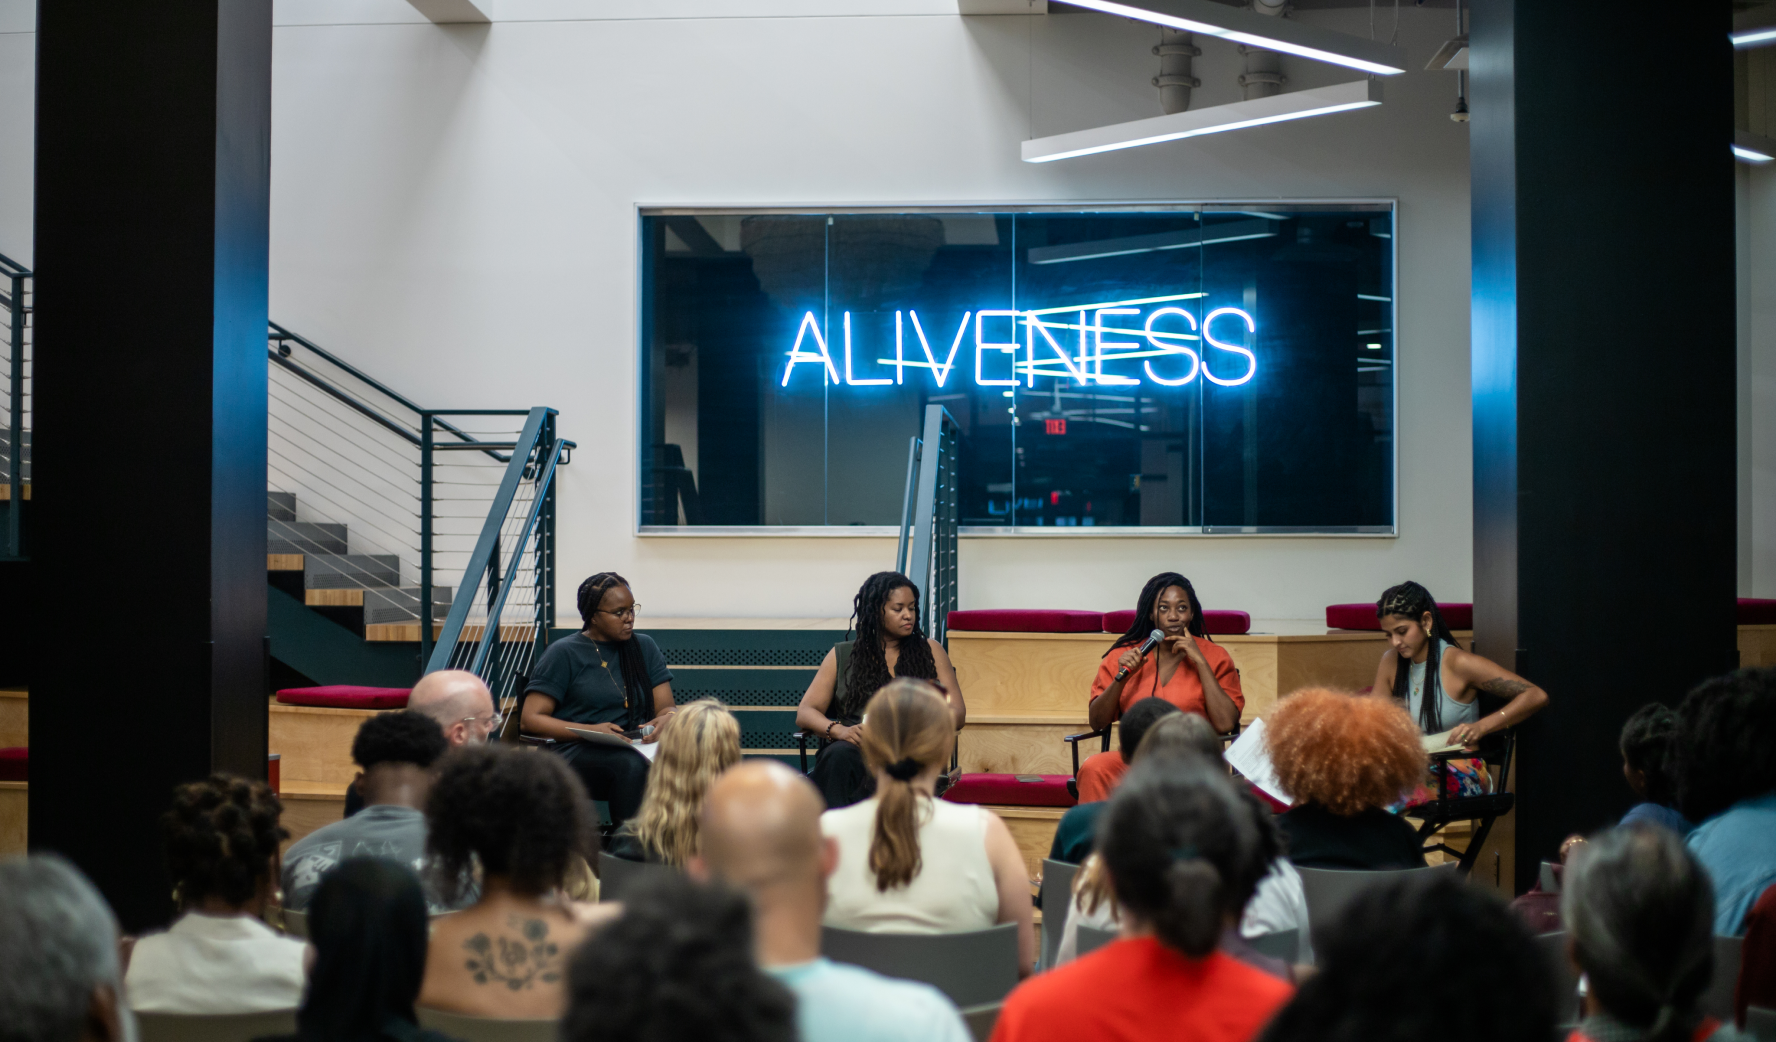 Interior image of Express Newark, a group of panelists are seated behind a blue neon sign that reads "ALIVENESS"